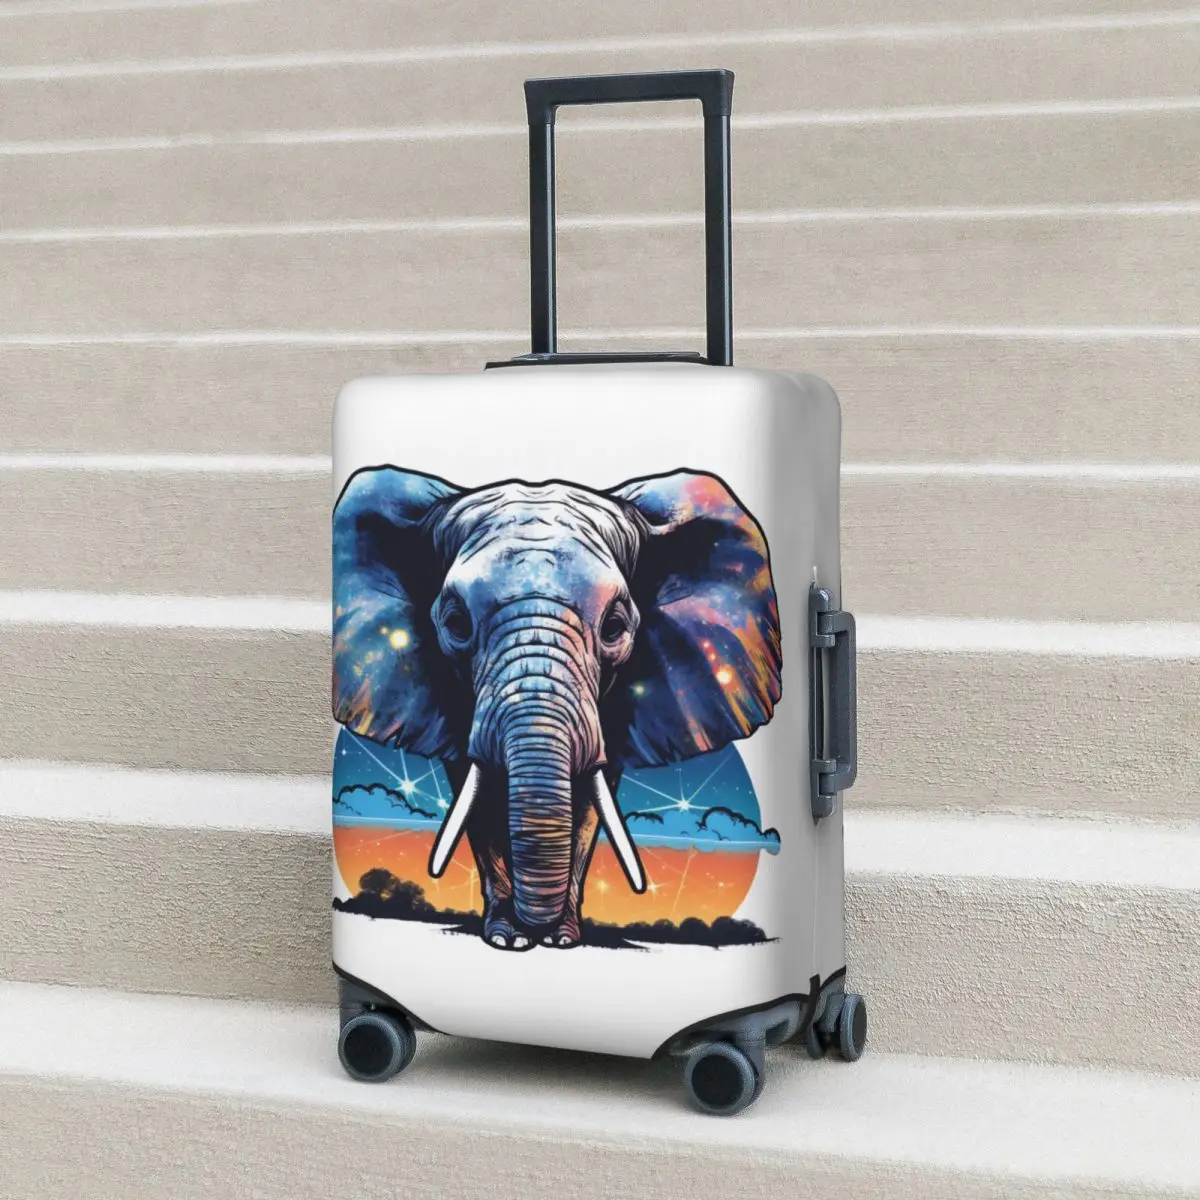 Elephant Suitcase Cover Sky Landscape Detail Design Vacation Travel Practical Luggage Case Protection